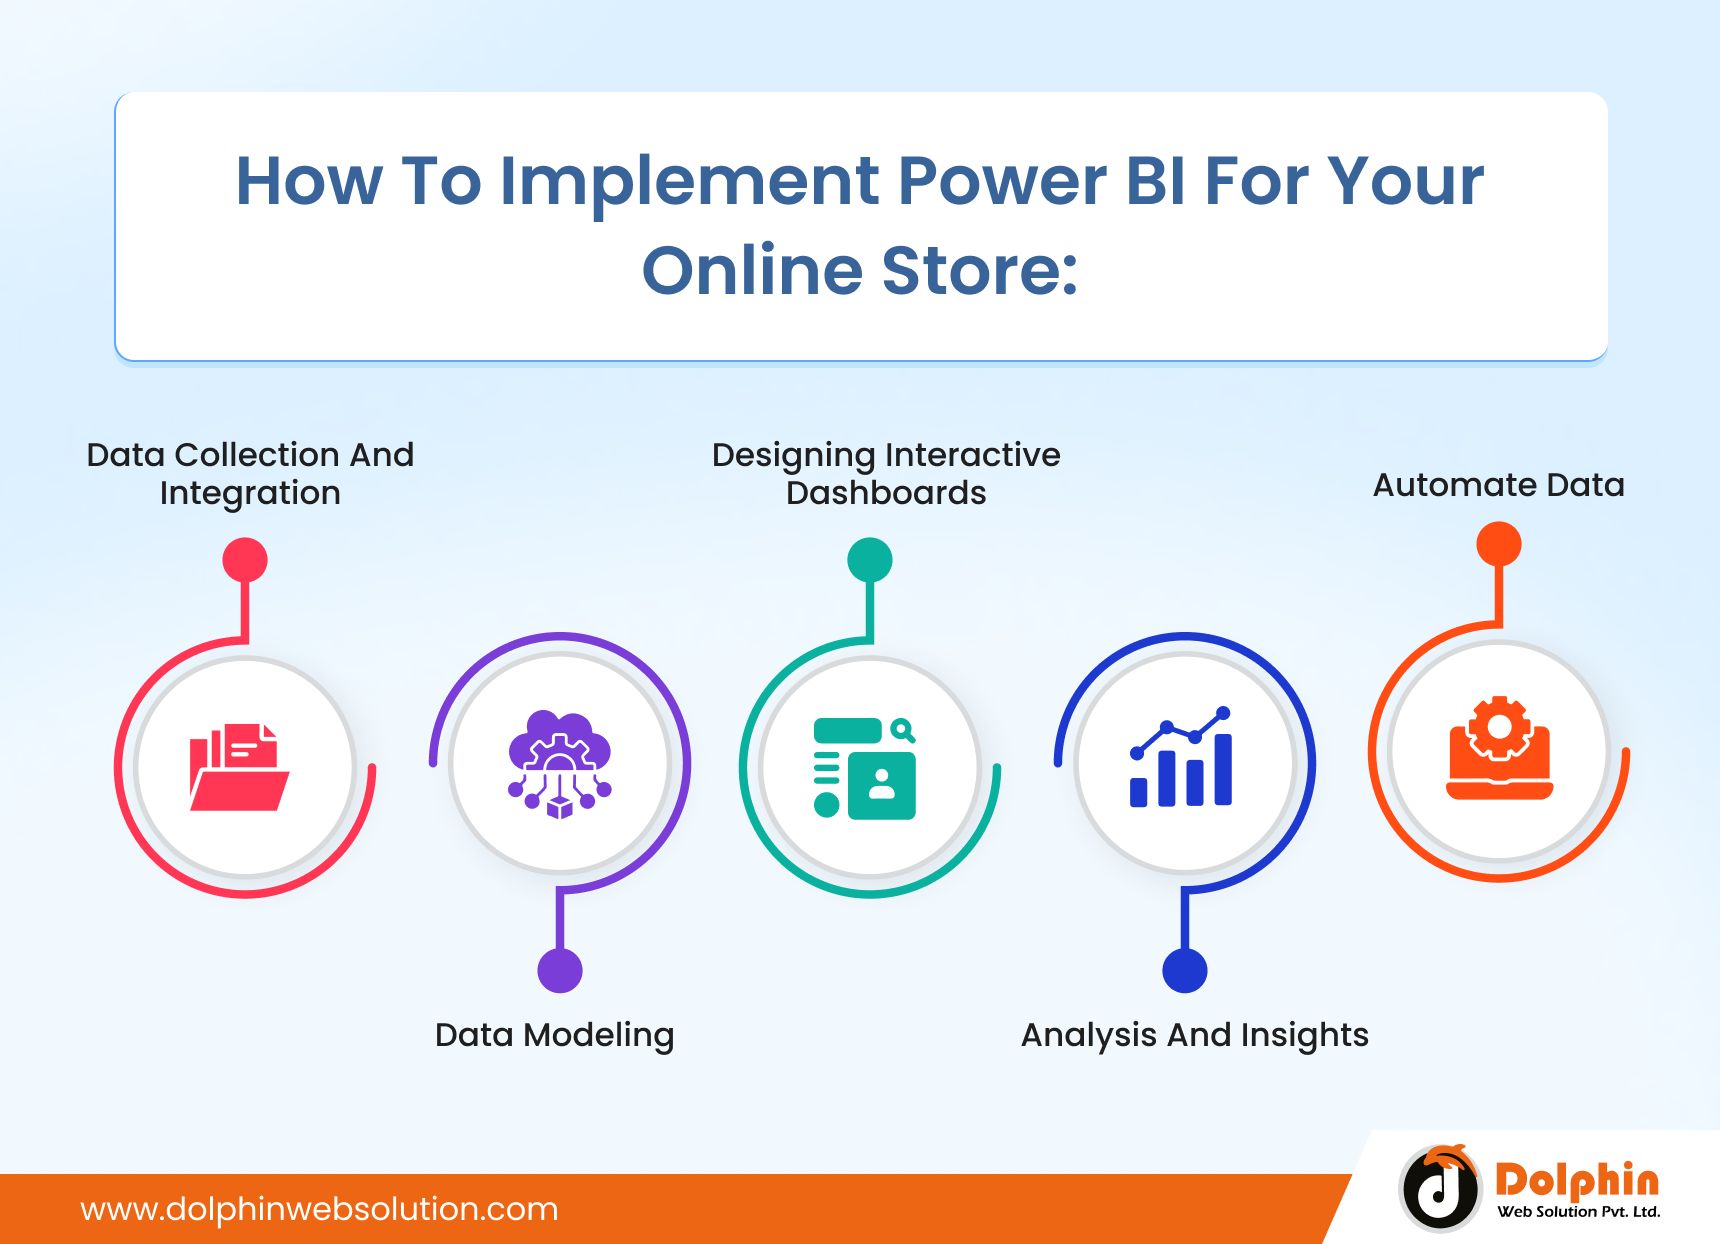 Implement Power BI For Your Online Store